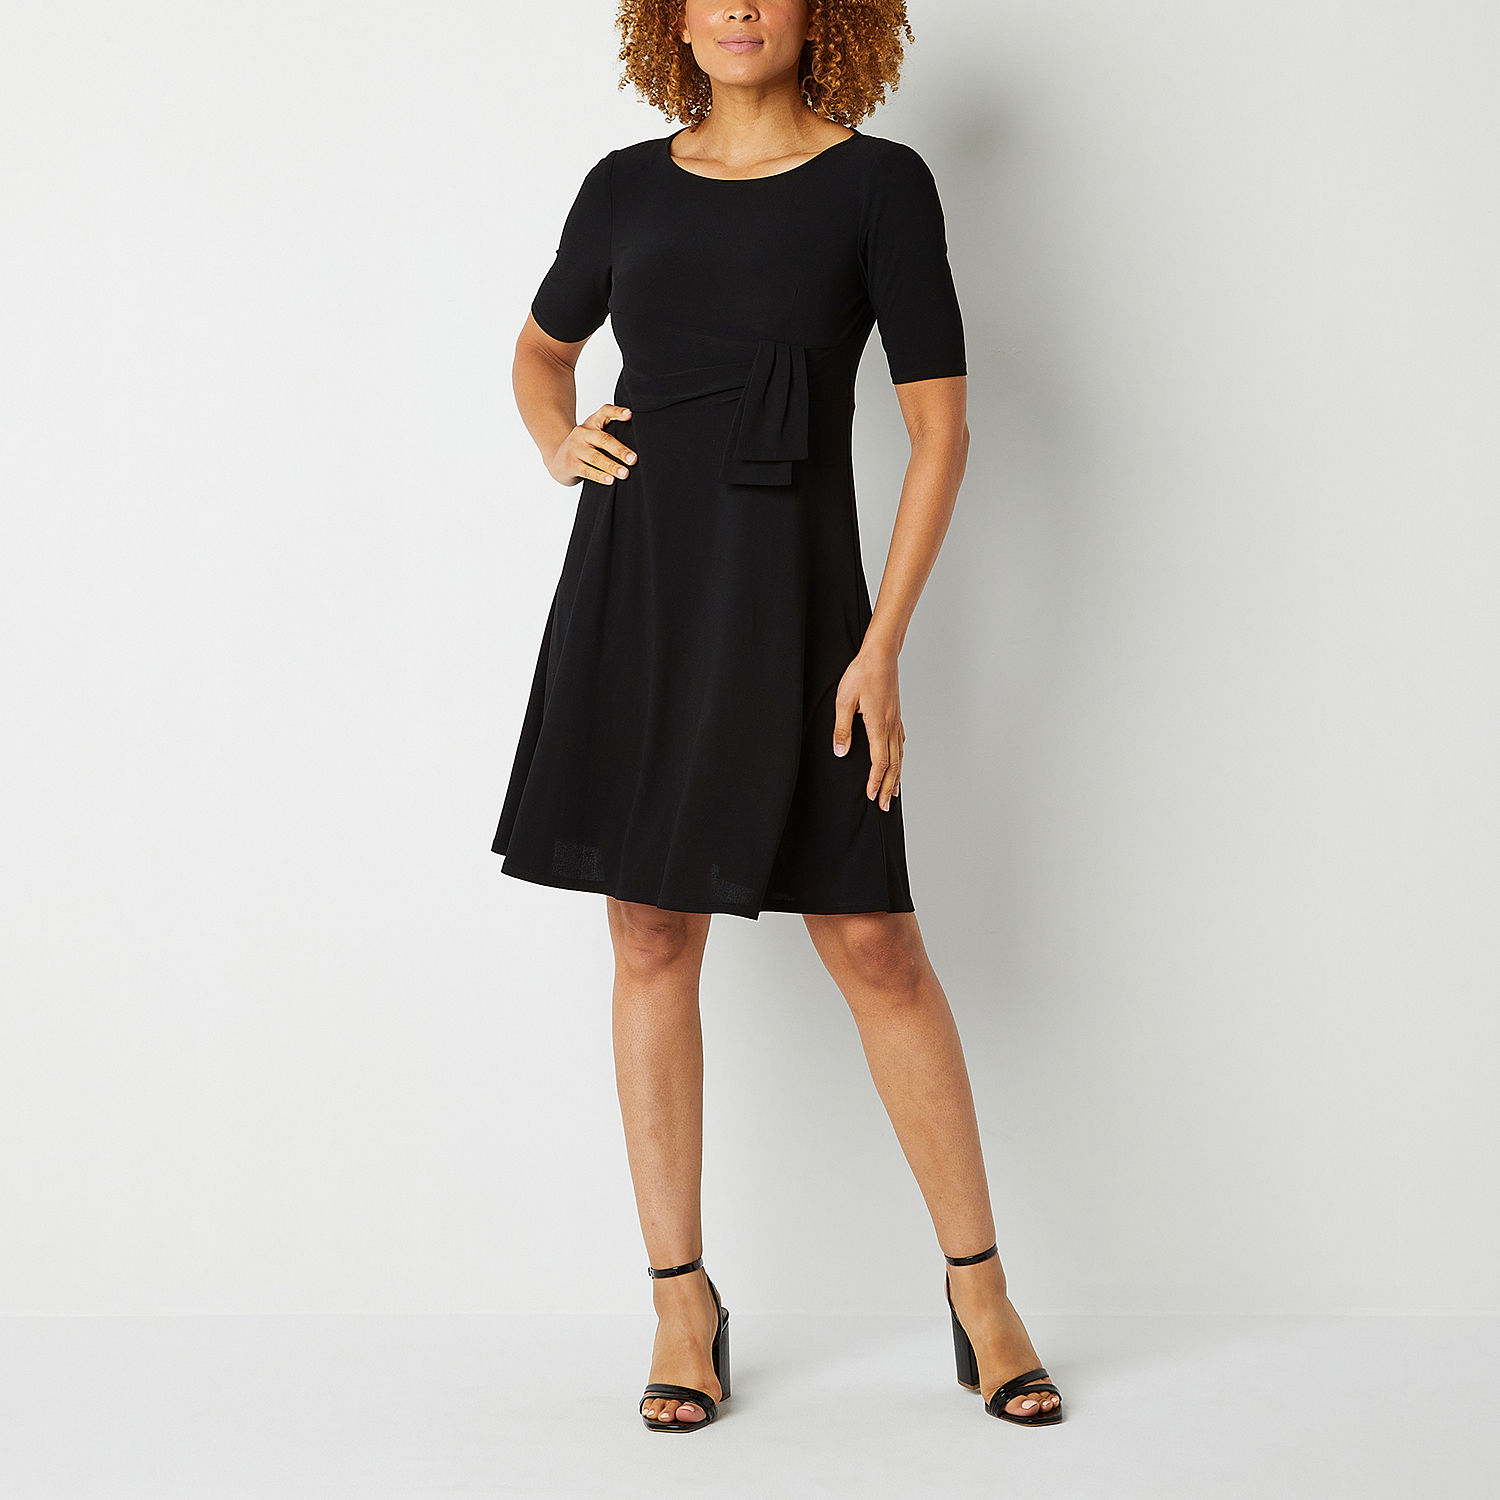 Perceptions Petite Short Sleeve Fit + Flare Dress, Color: Black - JCPenney